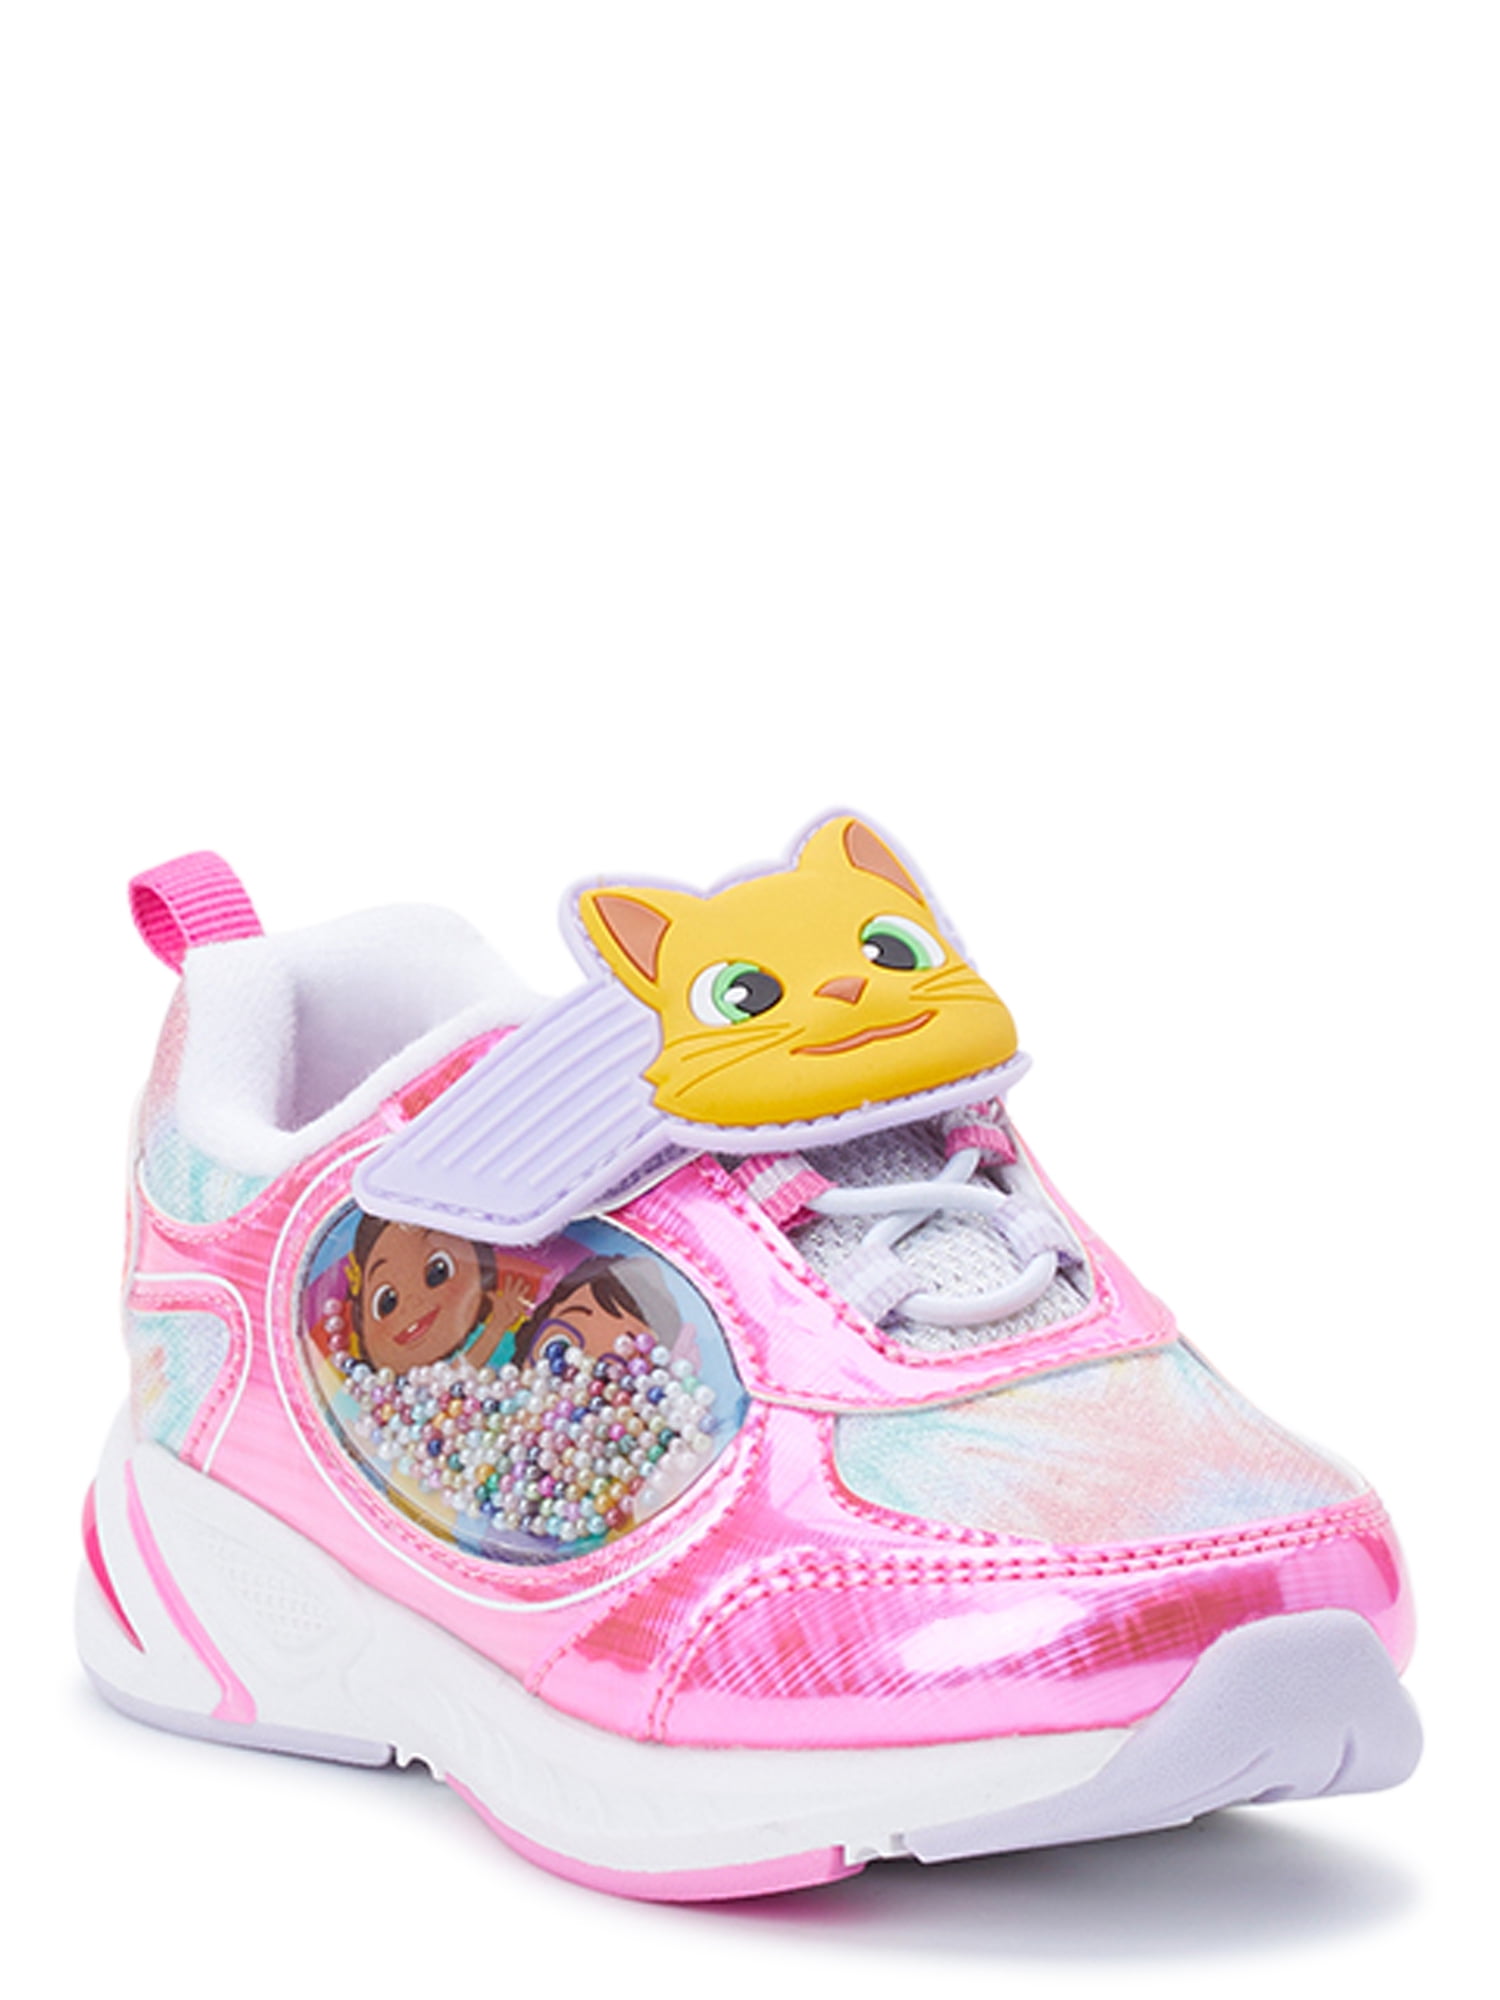 Cocomelon Toddler Girls Lighted Sizes 7-12 - Walmart.com